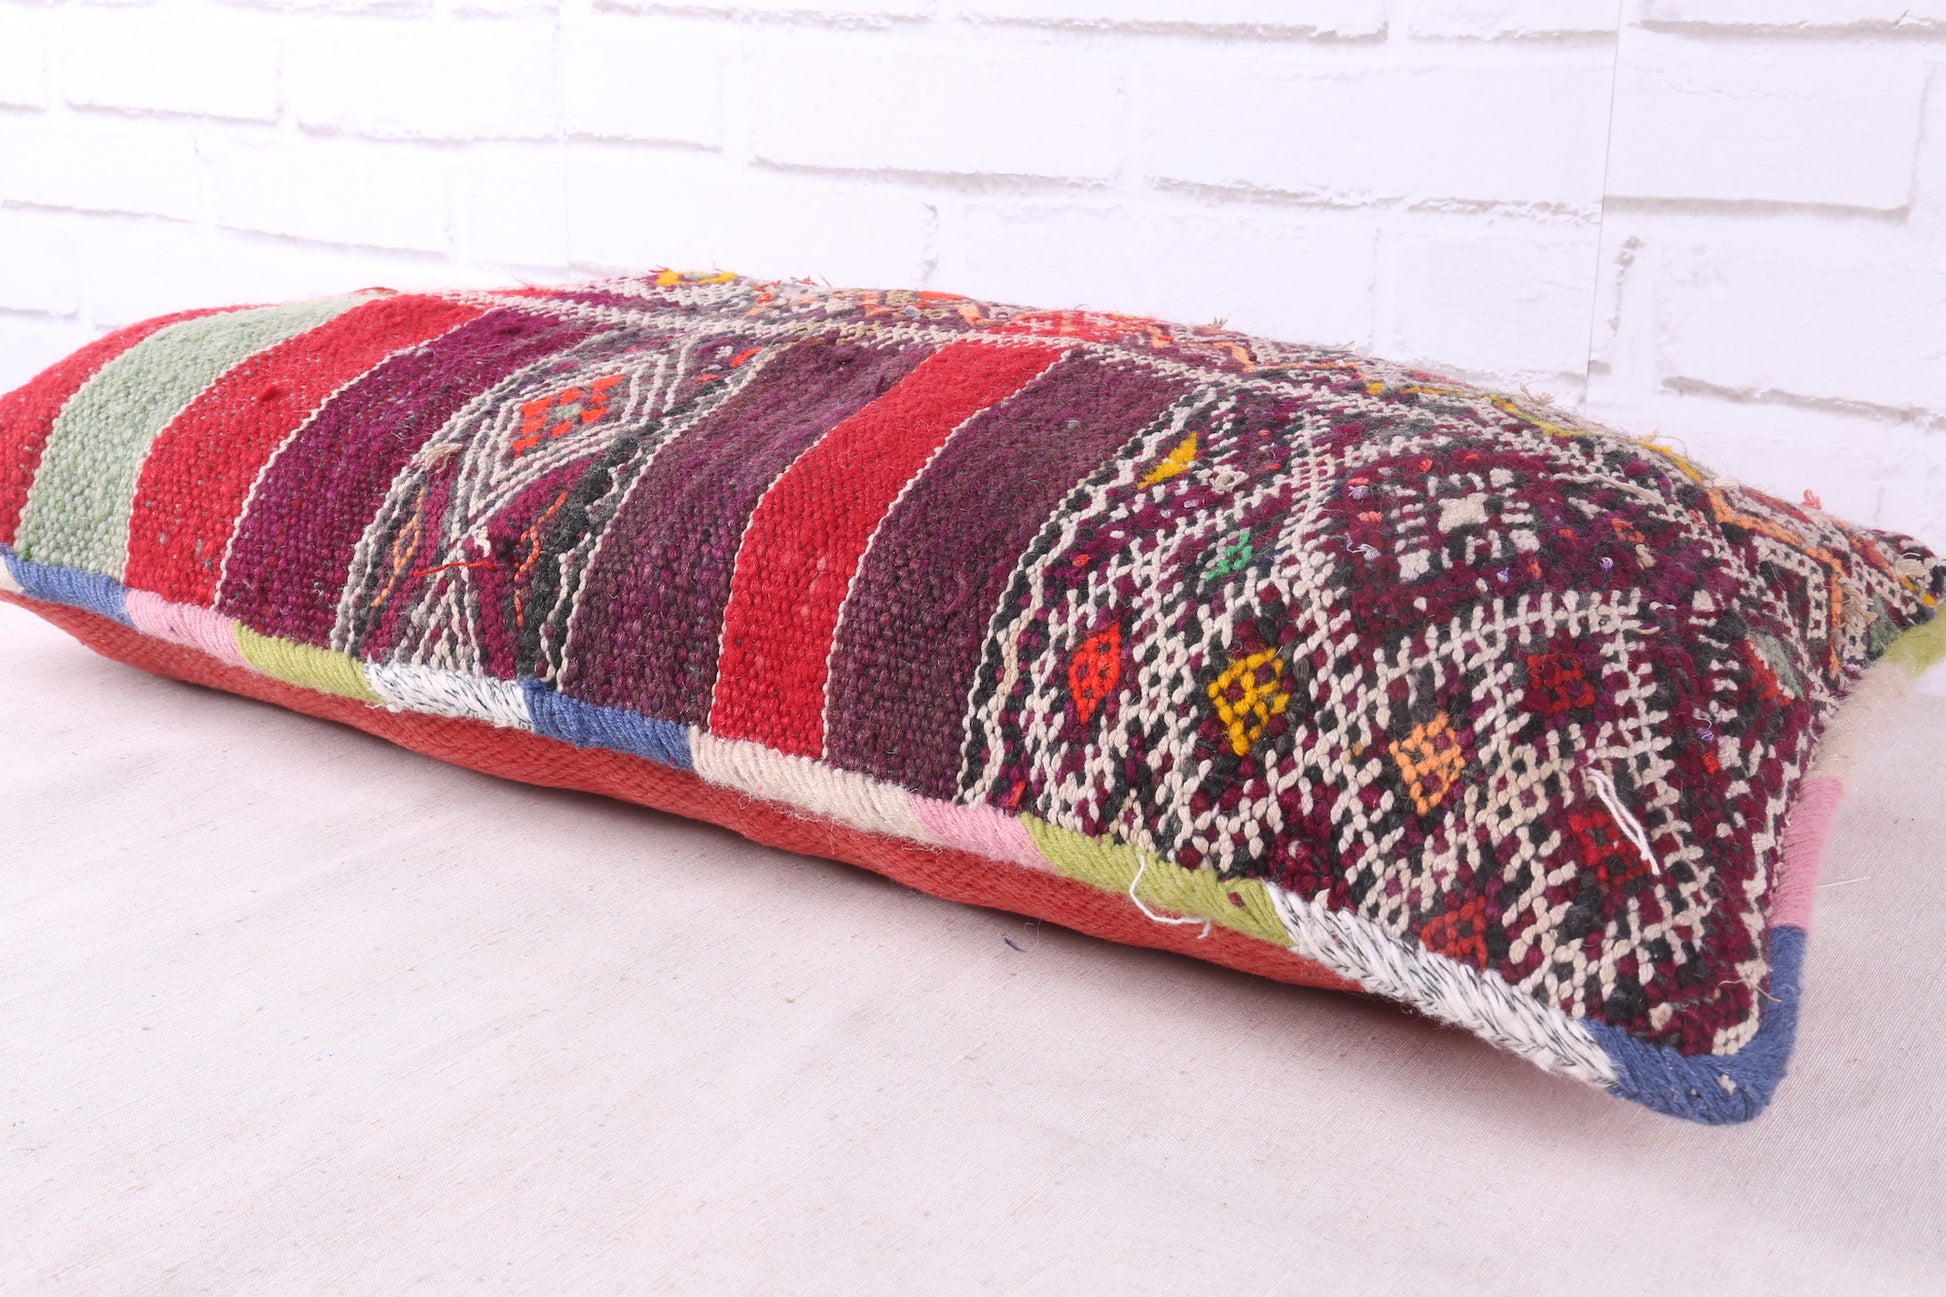 Moroccan handmade pillow 13.3 inches X 26.7 inches